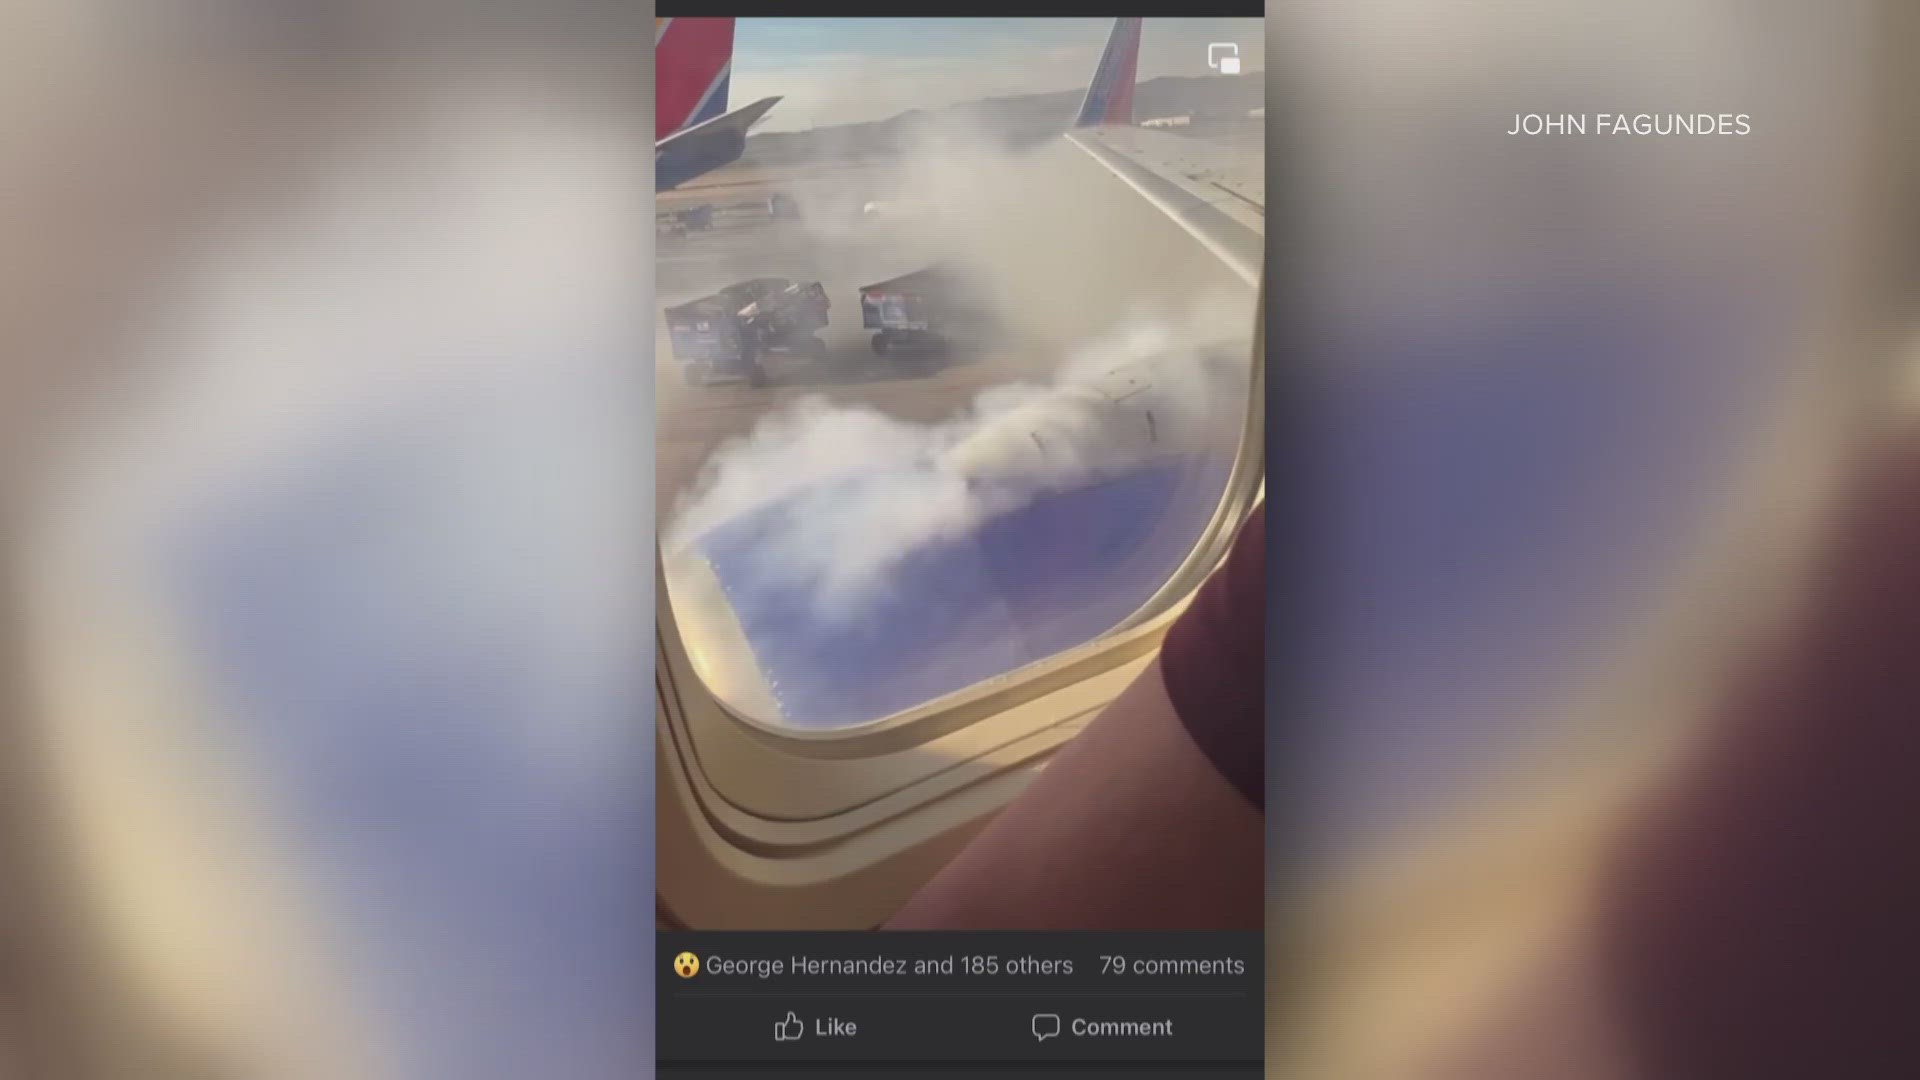 A Southwest Airlines flight from Phoenix to Puerto Vallarta, Mexico, was delayed Thursday after passengers saw one of the engines smoking.